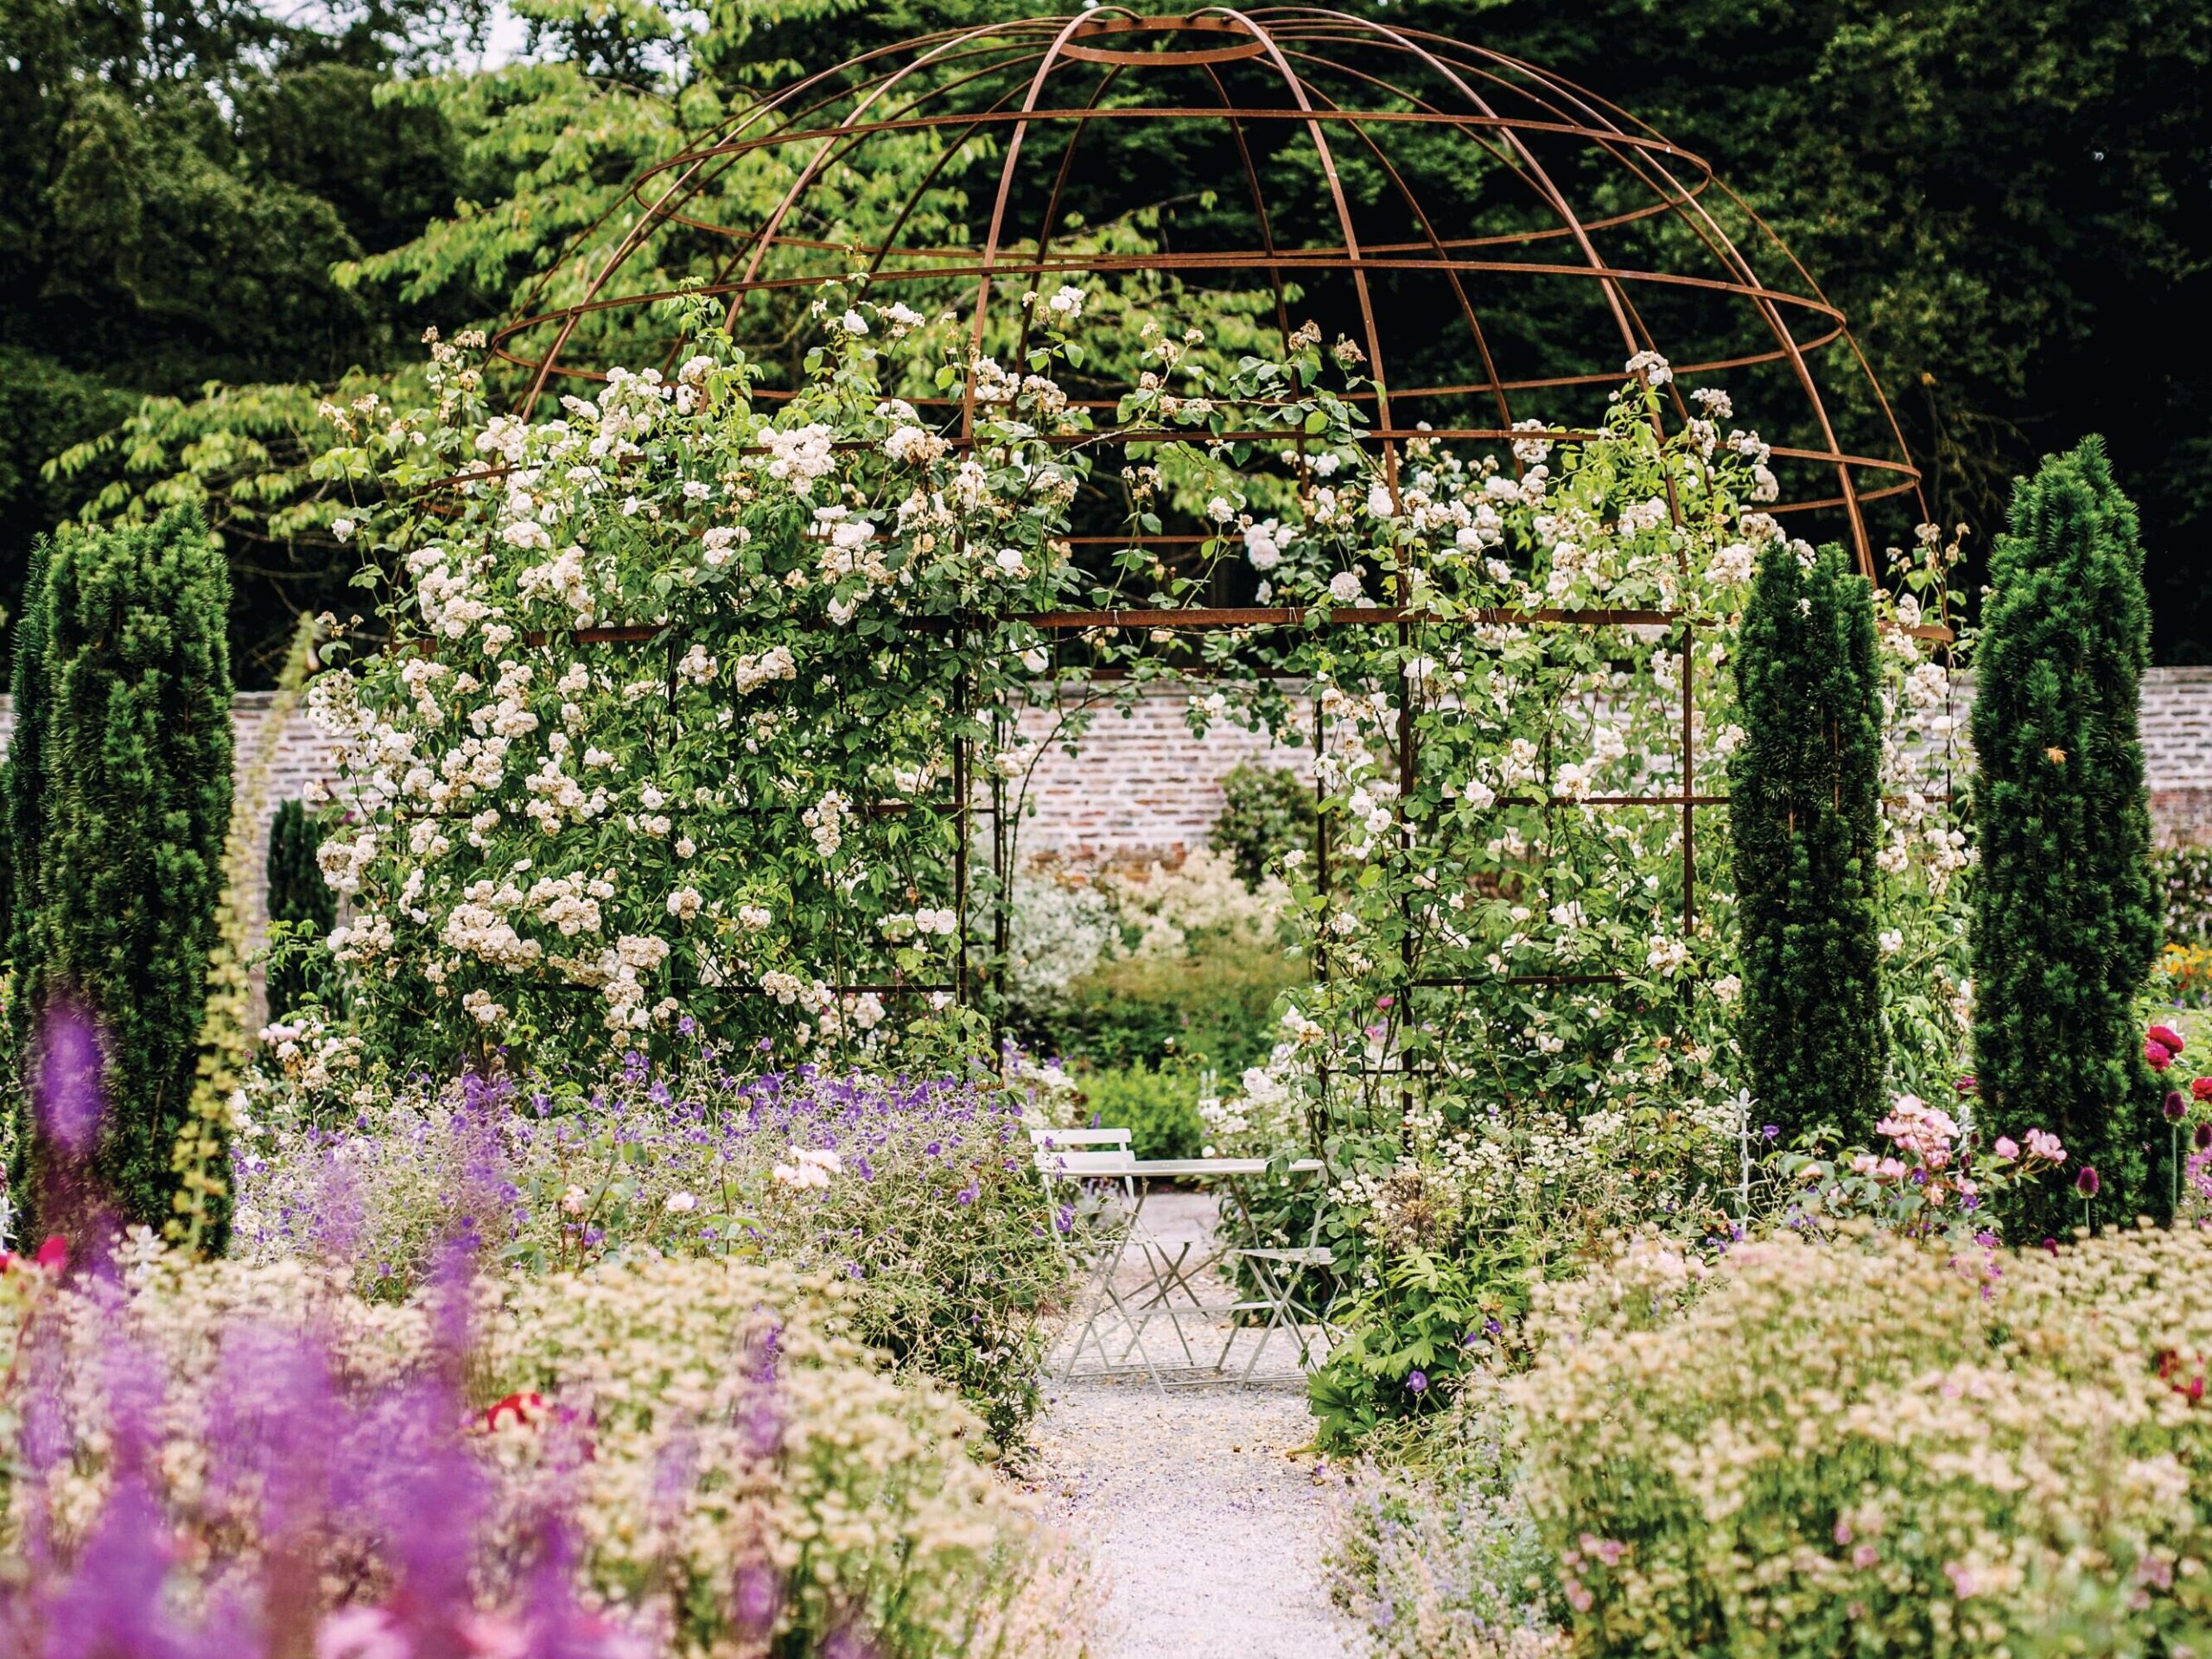 A walled kitchen garden in North Yorkshire designed by Tom Stuart-Smith -  Gardens Illustrated